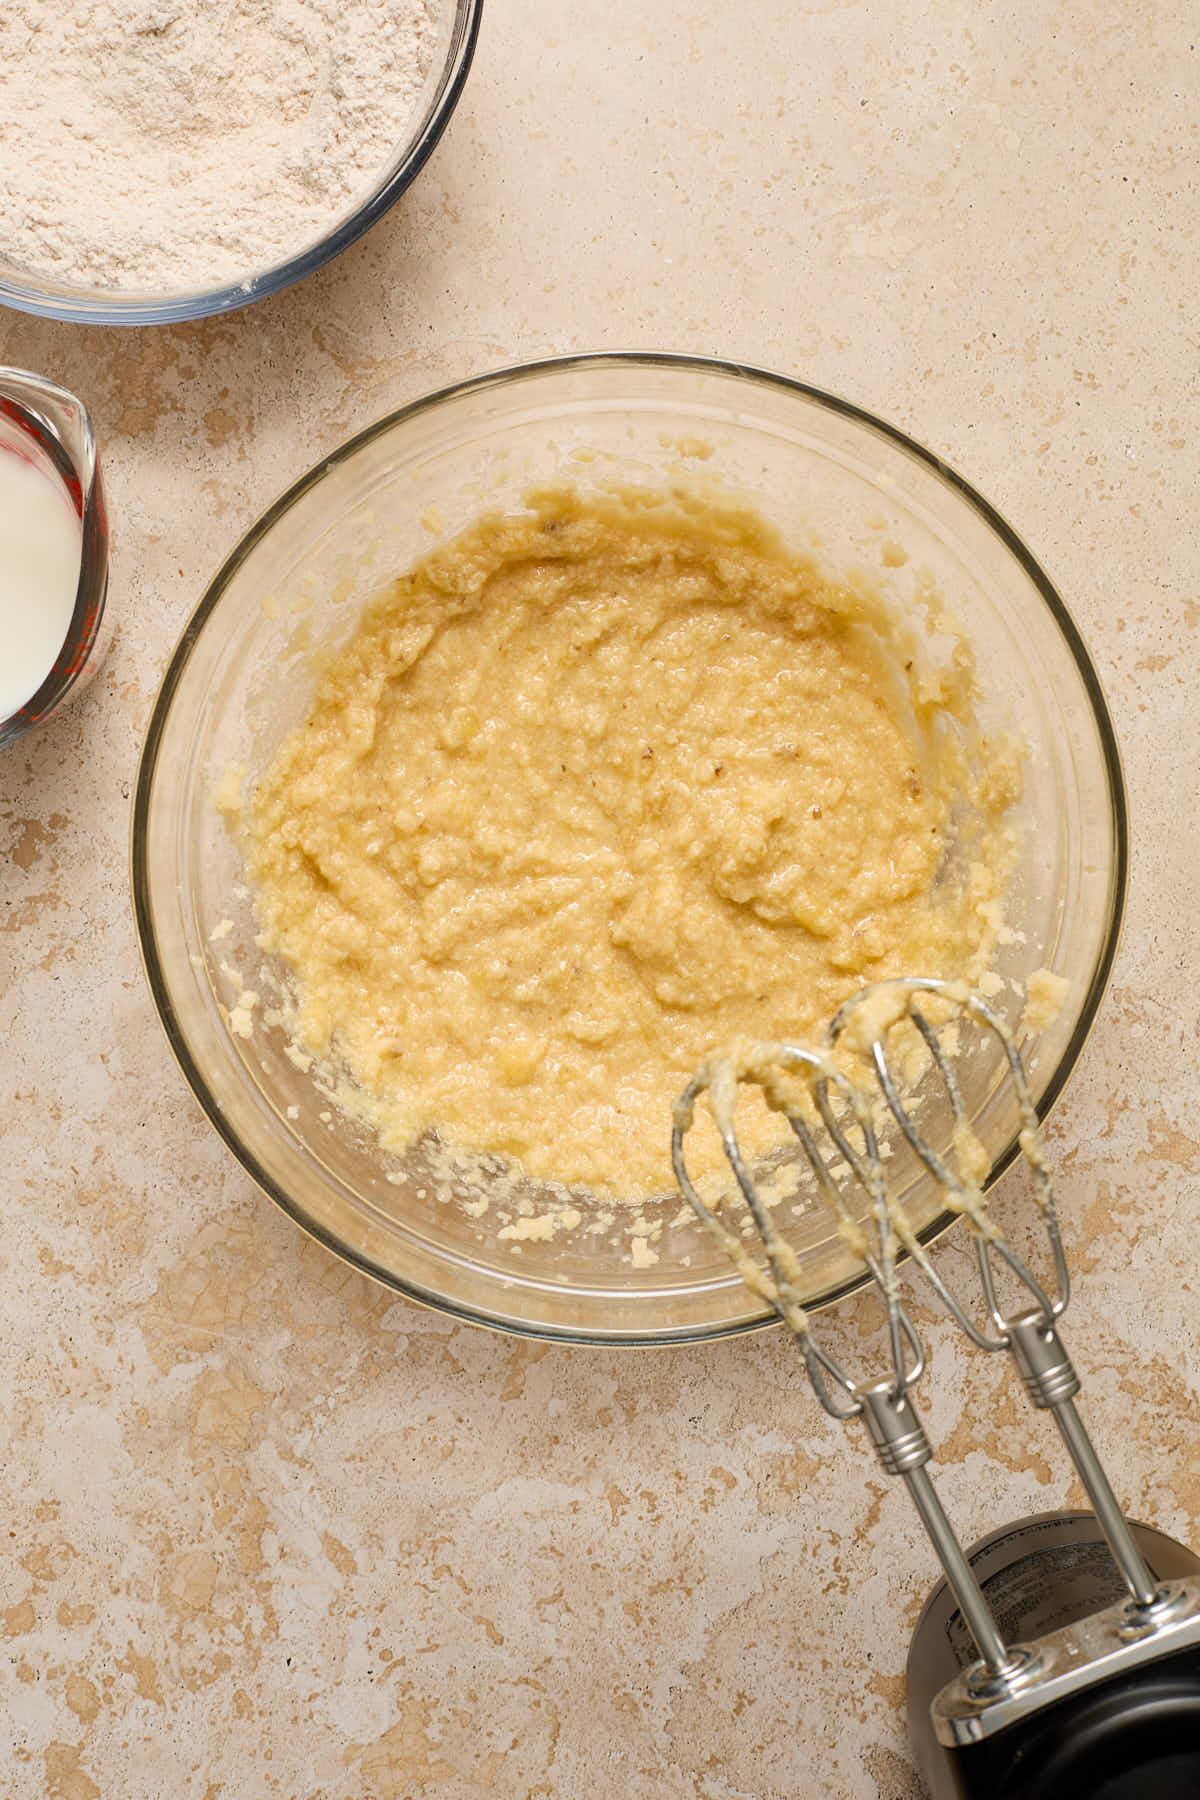 Wet ingredients mixed together with milk and flour mixture on the side.